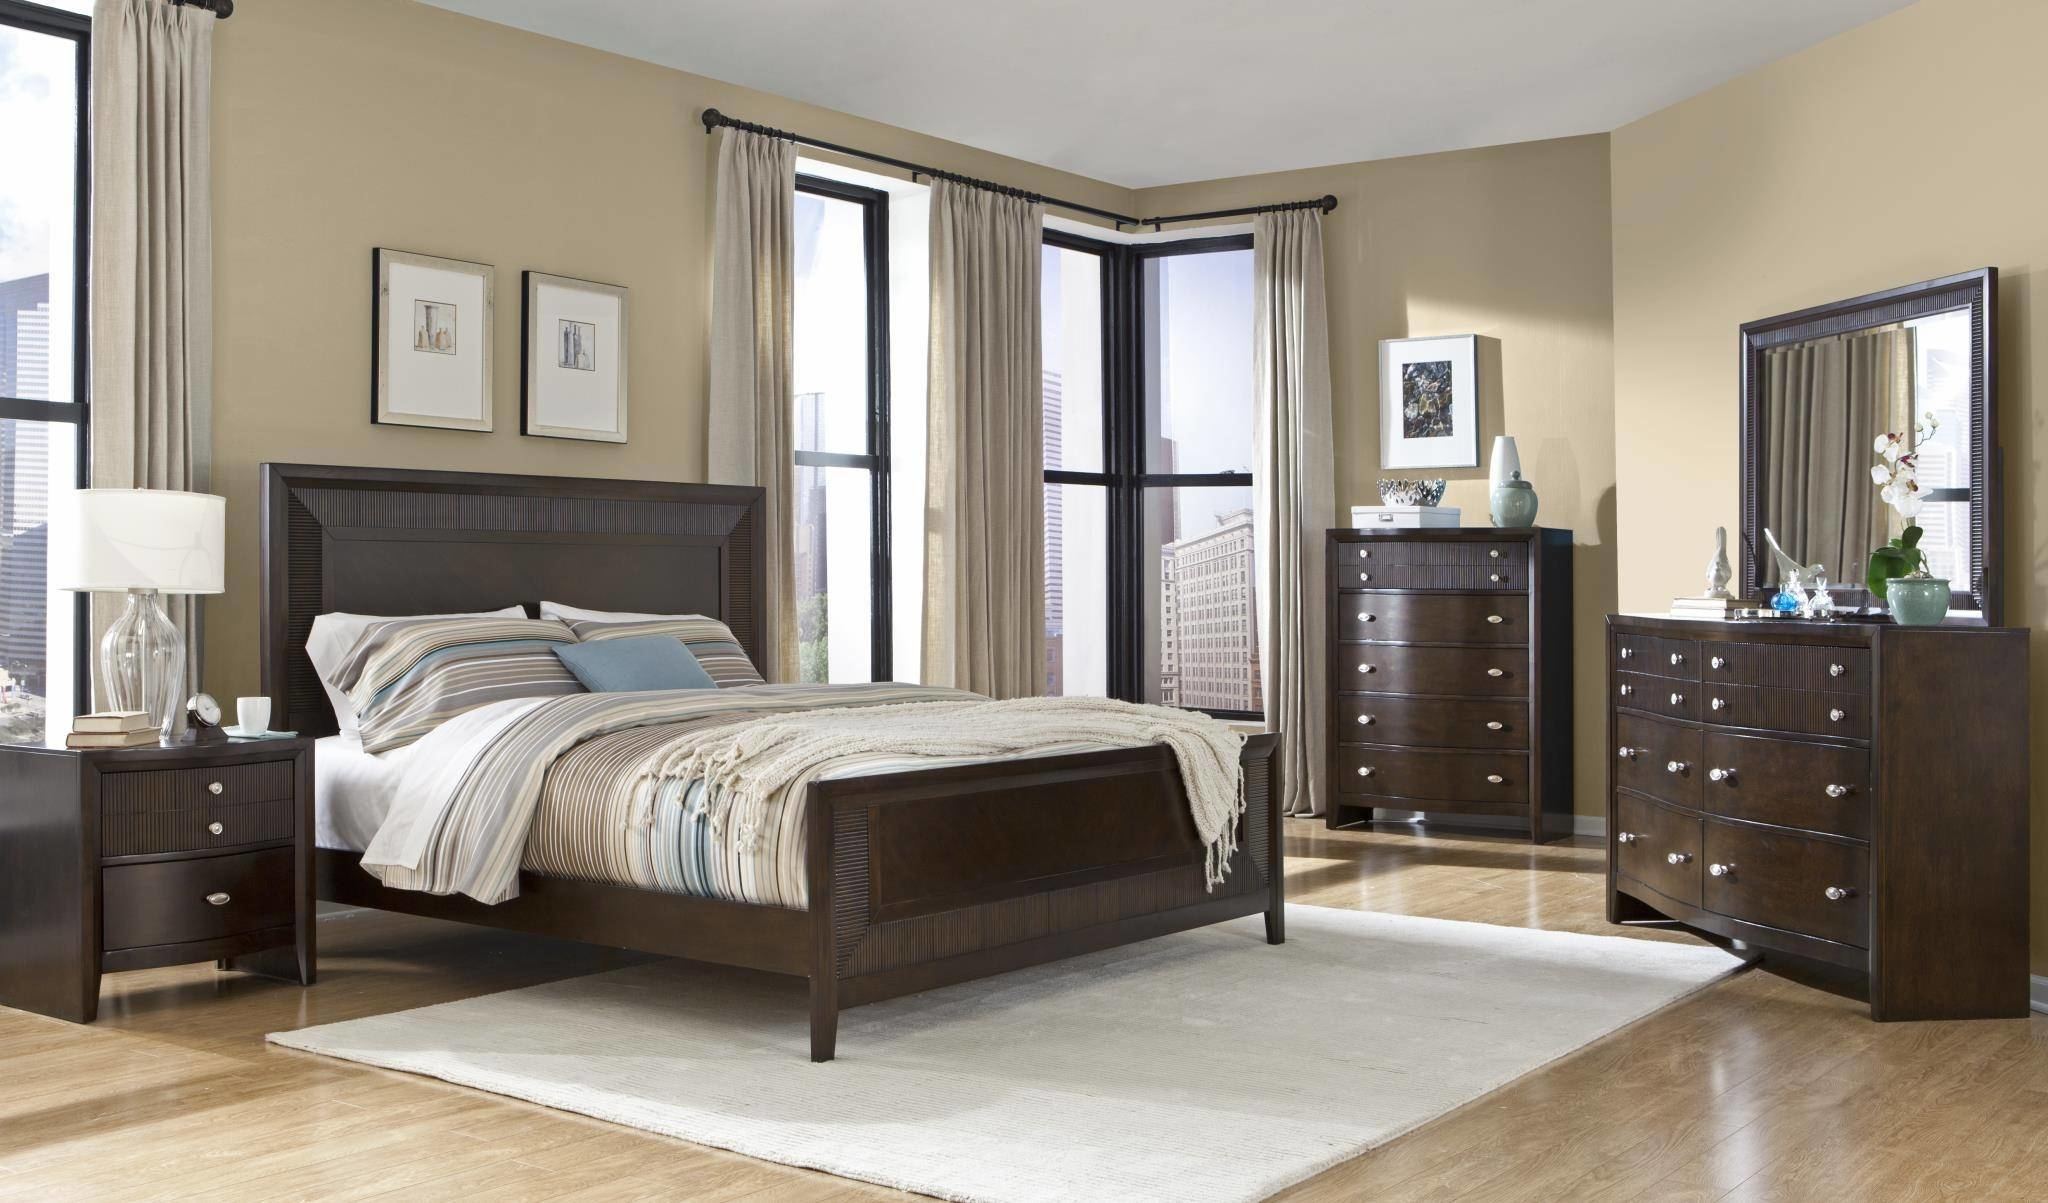 Adorable Espresso Colored Bedroom Furniture Brown Coloured Grace Set Finish Licious Ure Paint In Colors P Home Design Ideas Inspired Living Enchanting Room